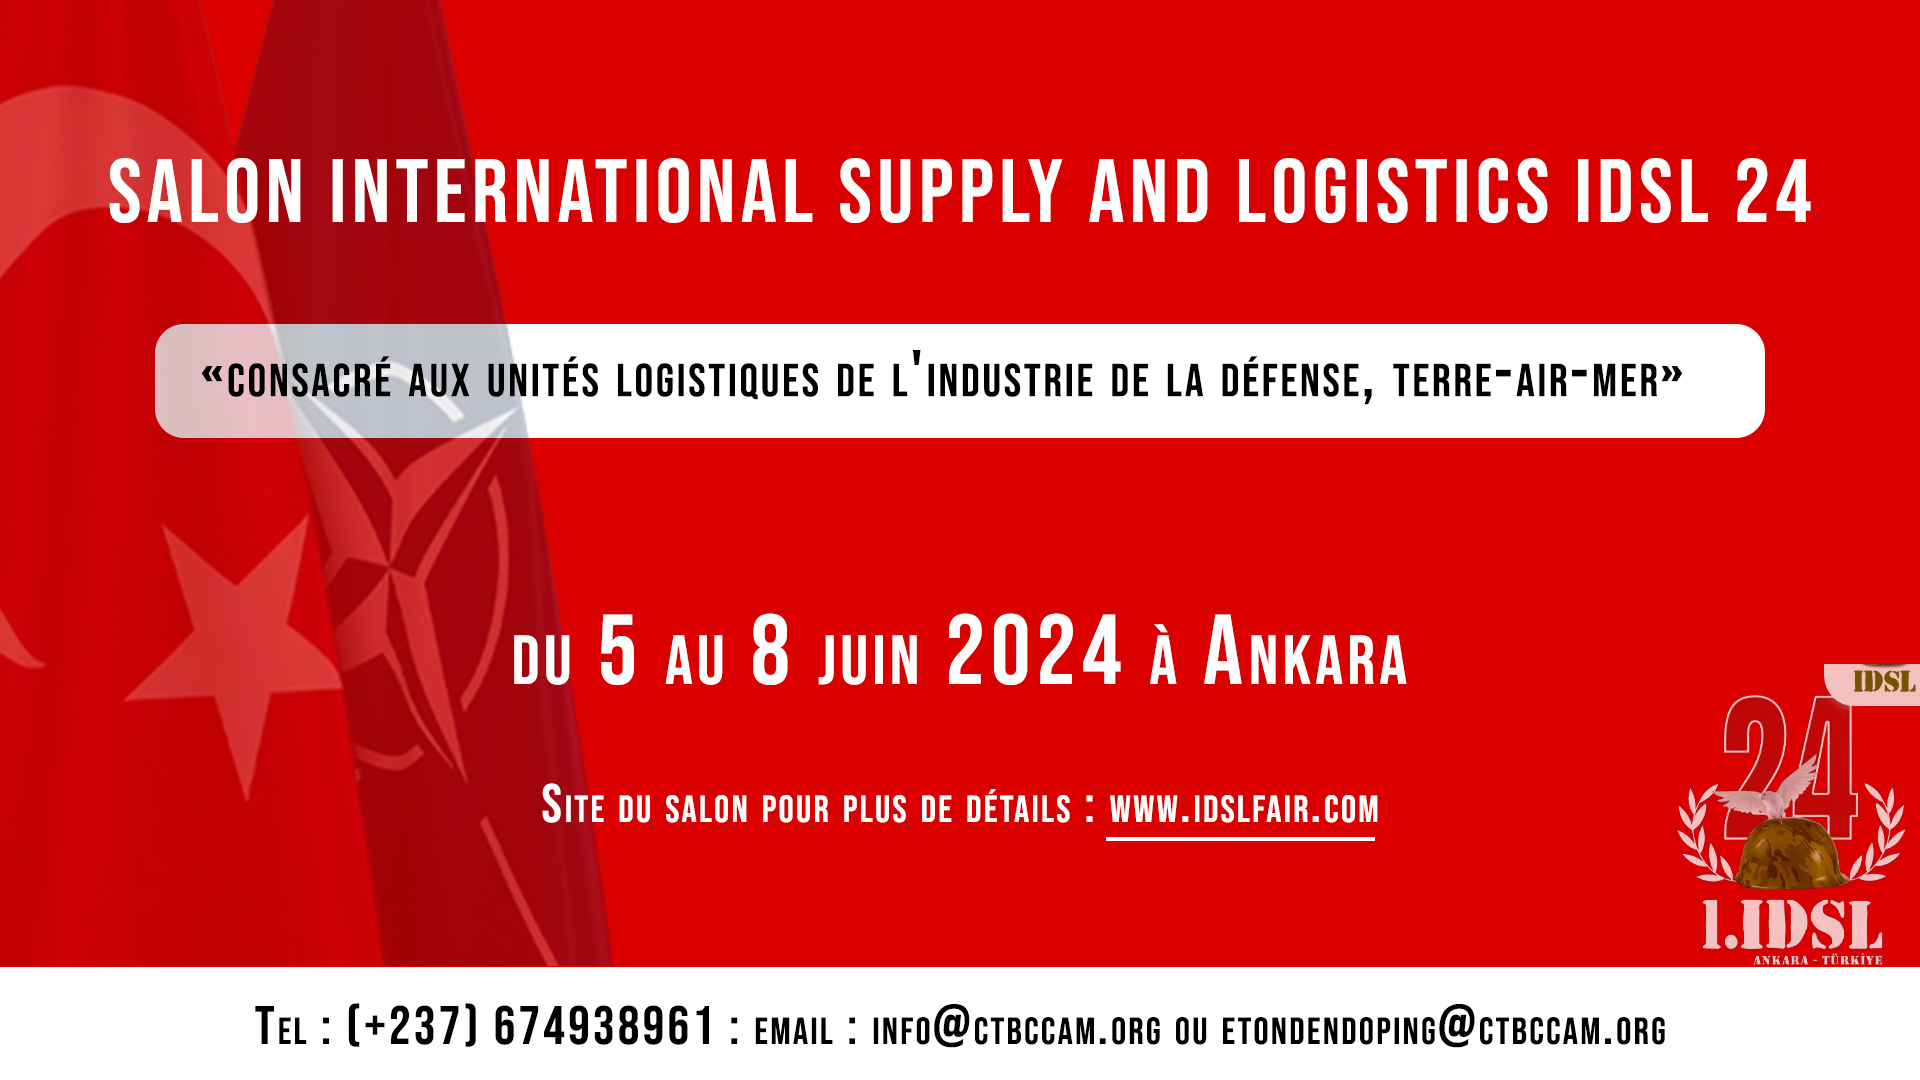 Supply and Logistics Exhibition